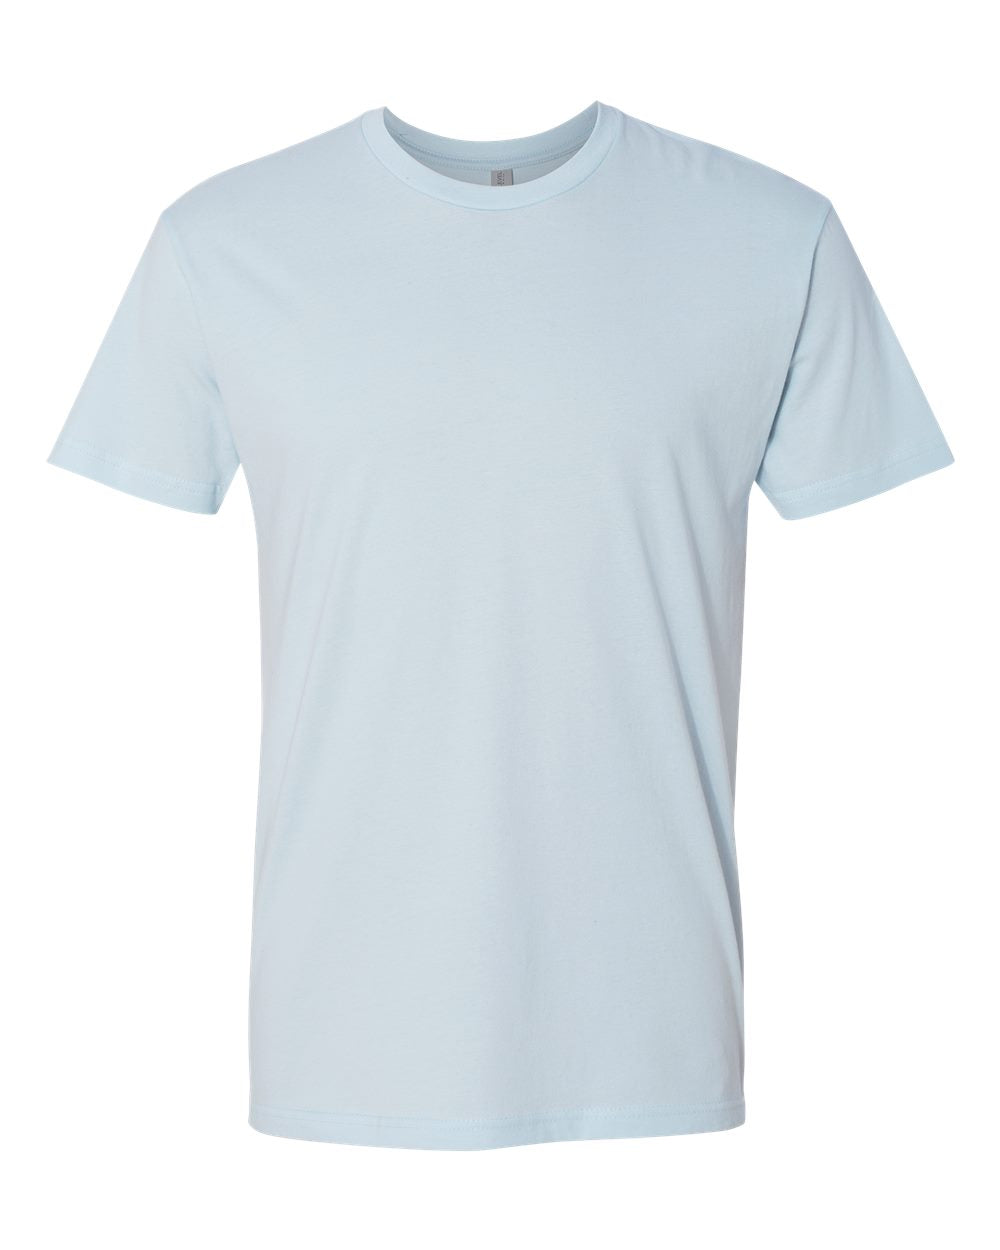 Next Level Cotton Tee (3600) in Light Blue